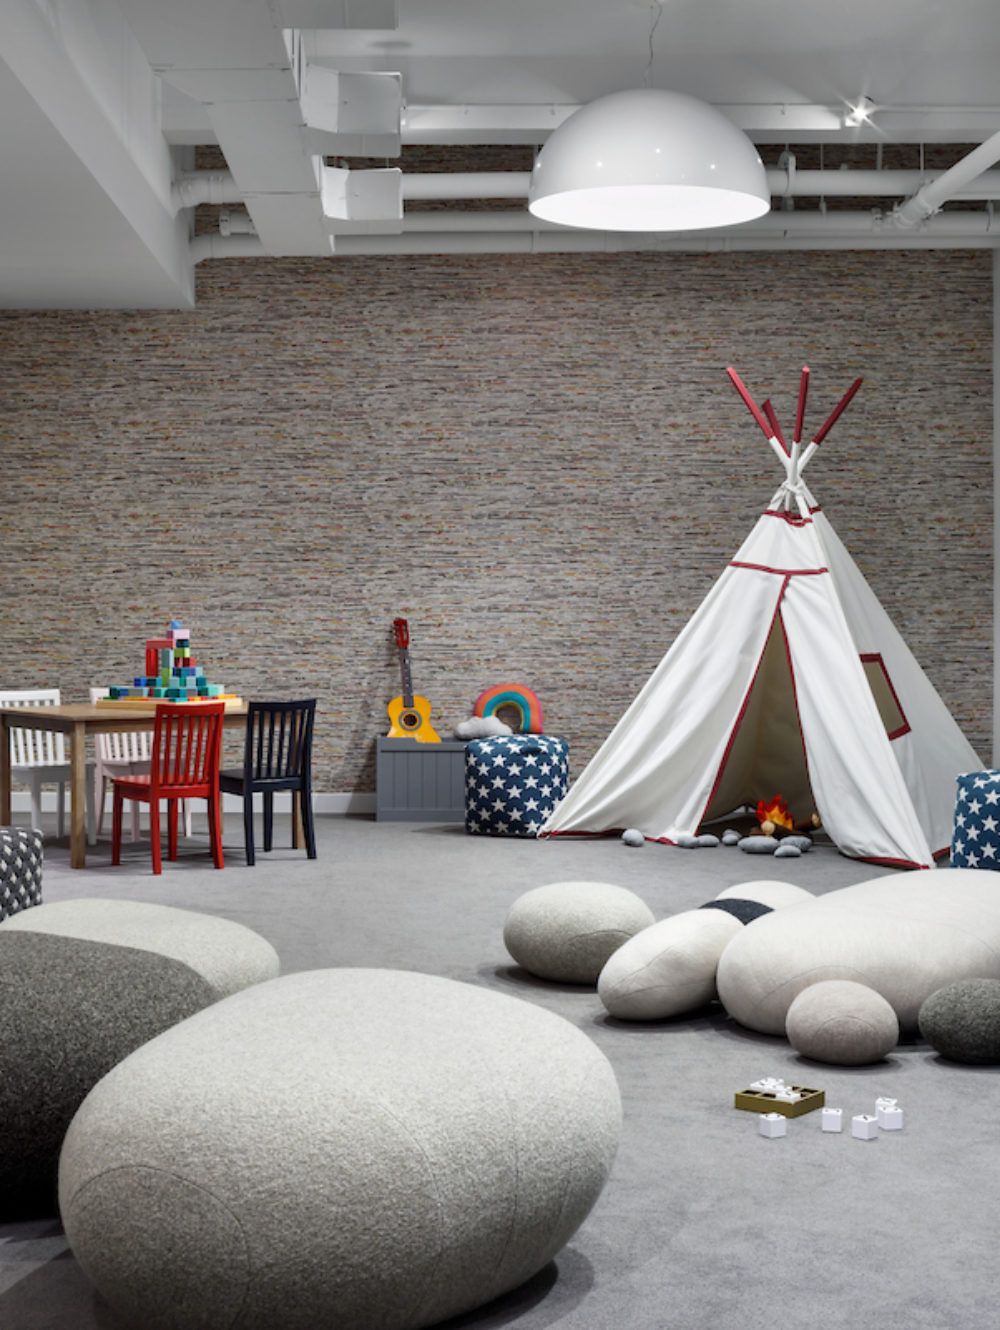 Interior view of 88 & 90 Lexington residence kids playroom in New York City. Has white tent, grey carpet floors and chairs.